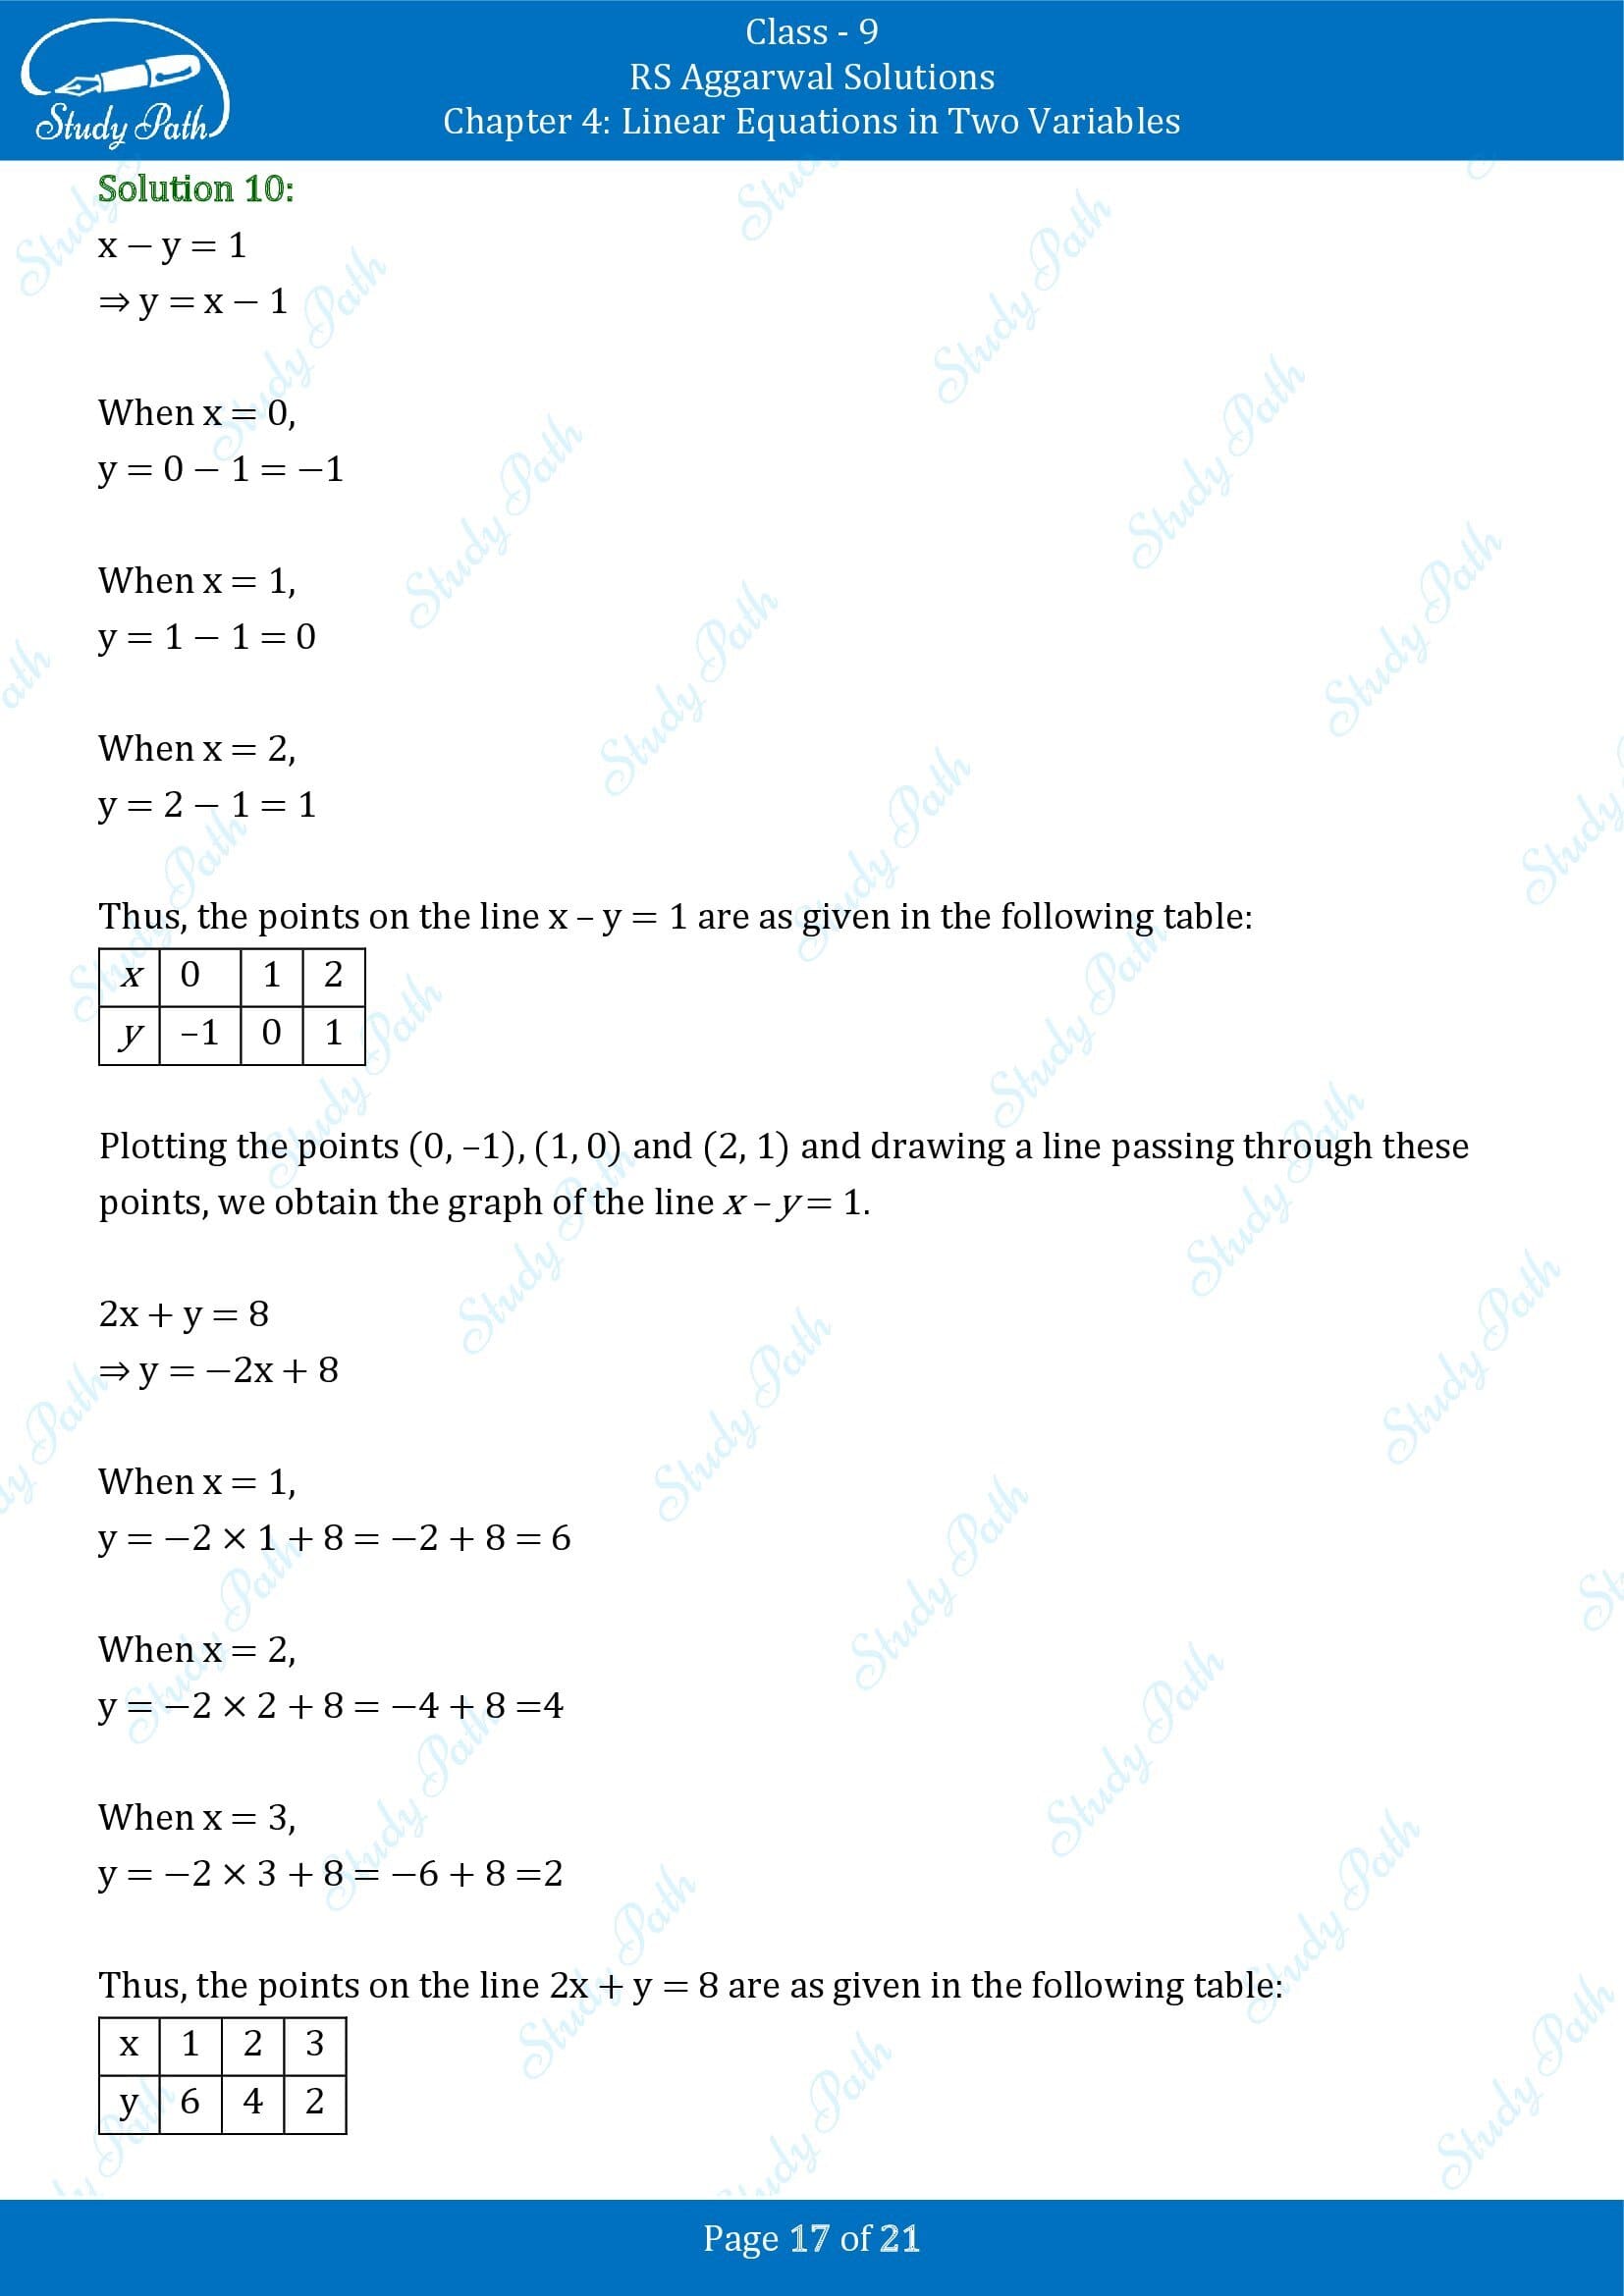 RS Aggarwal Solutions Class 9 Chapter 4 Linear Equations in Two Variables Exercise 4B 00017